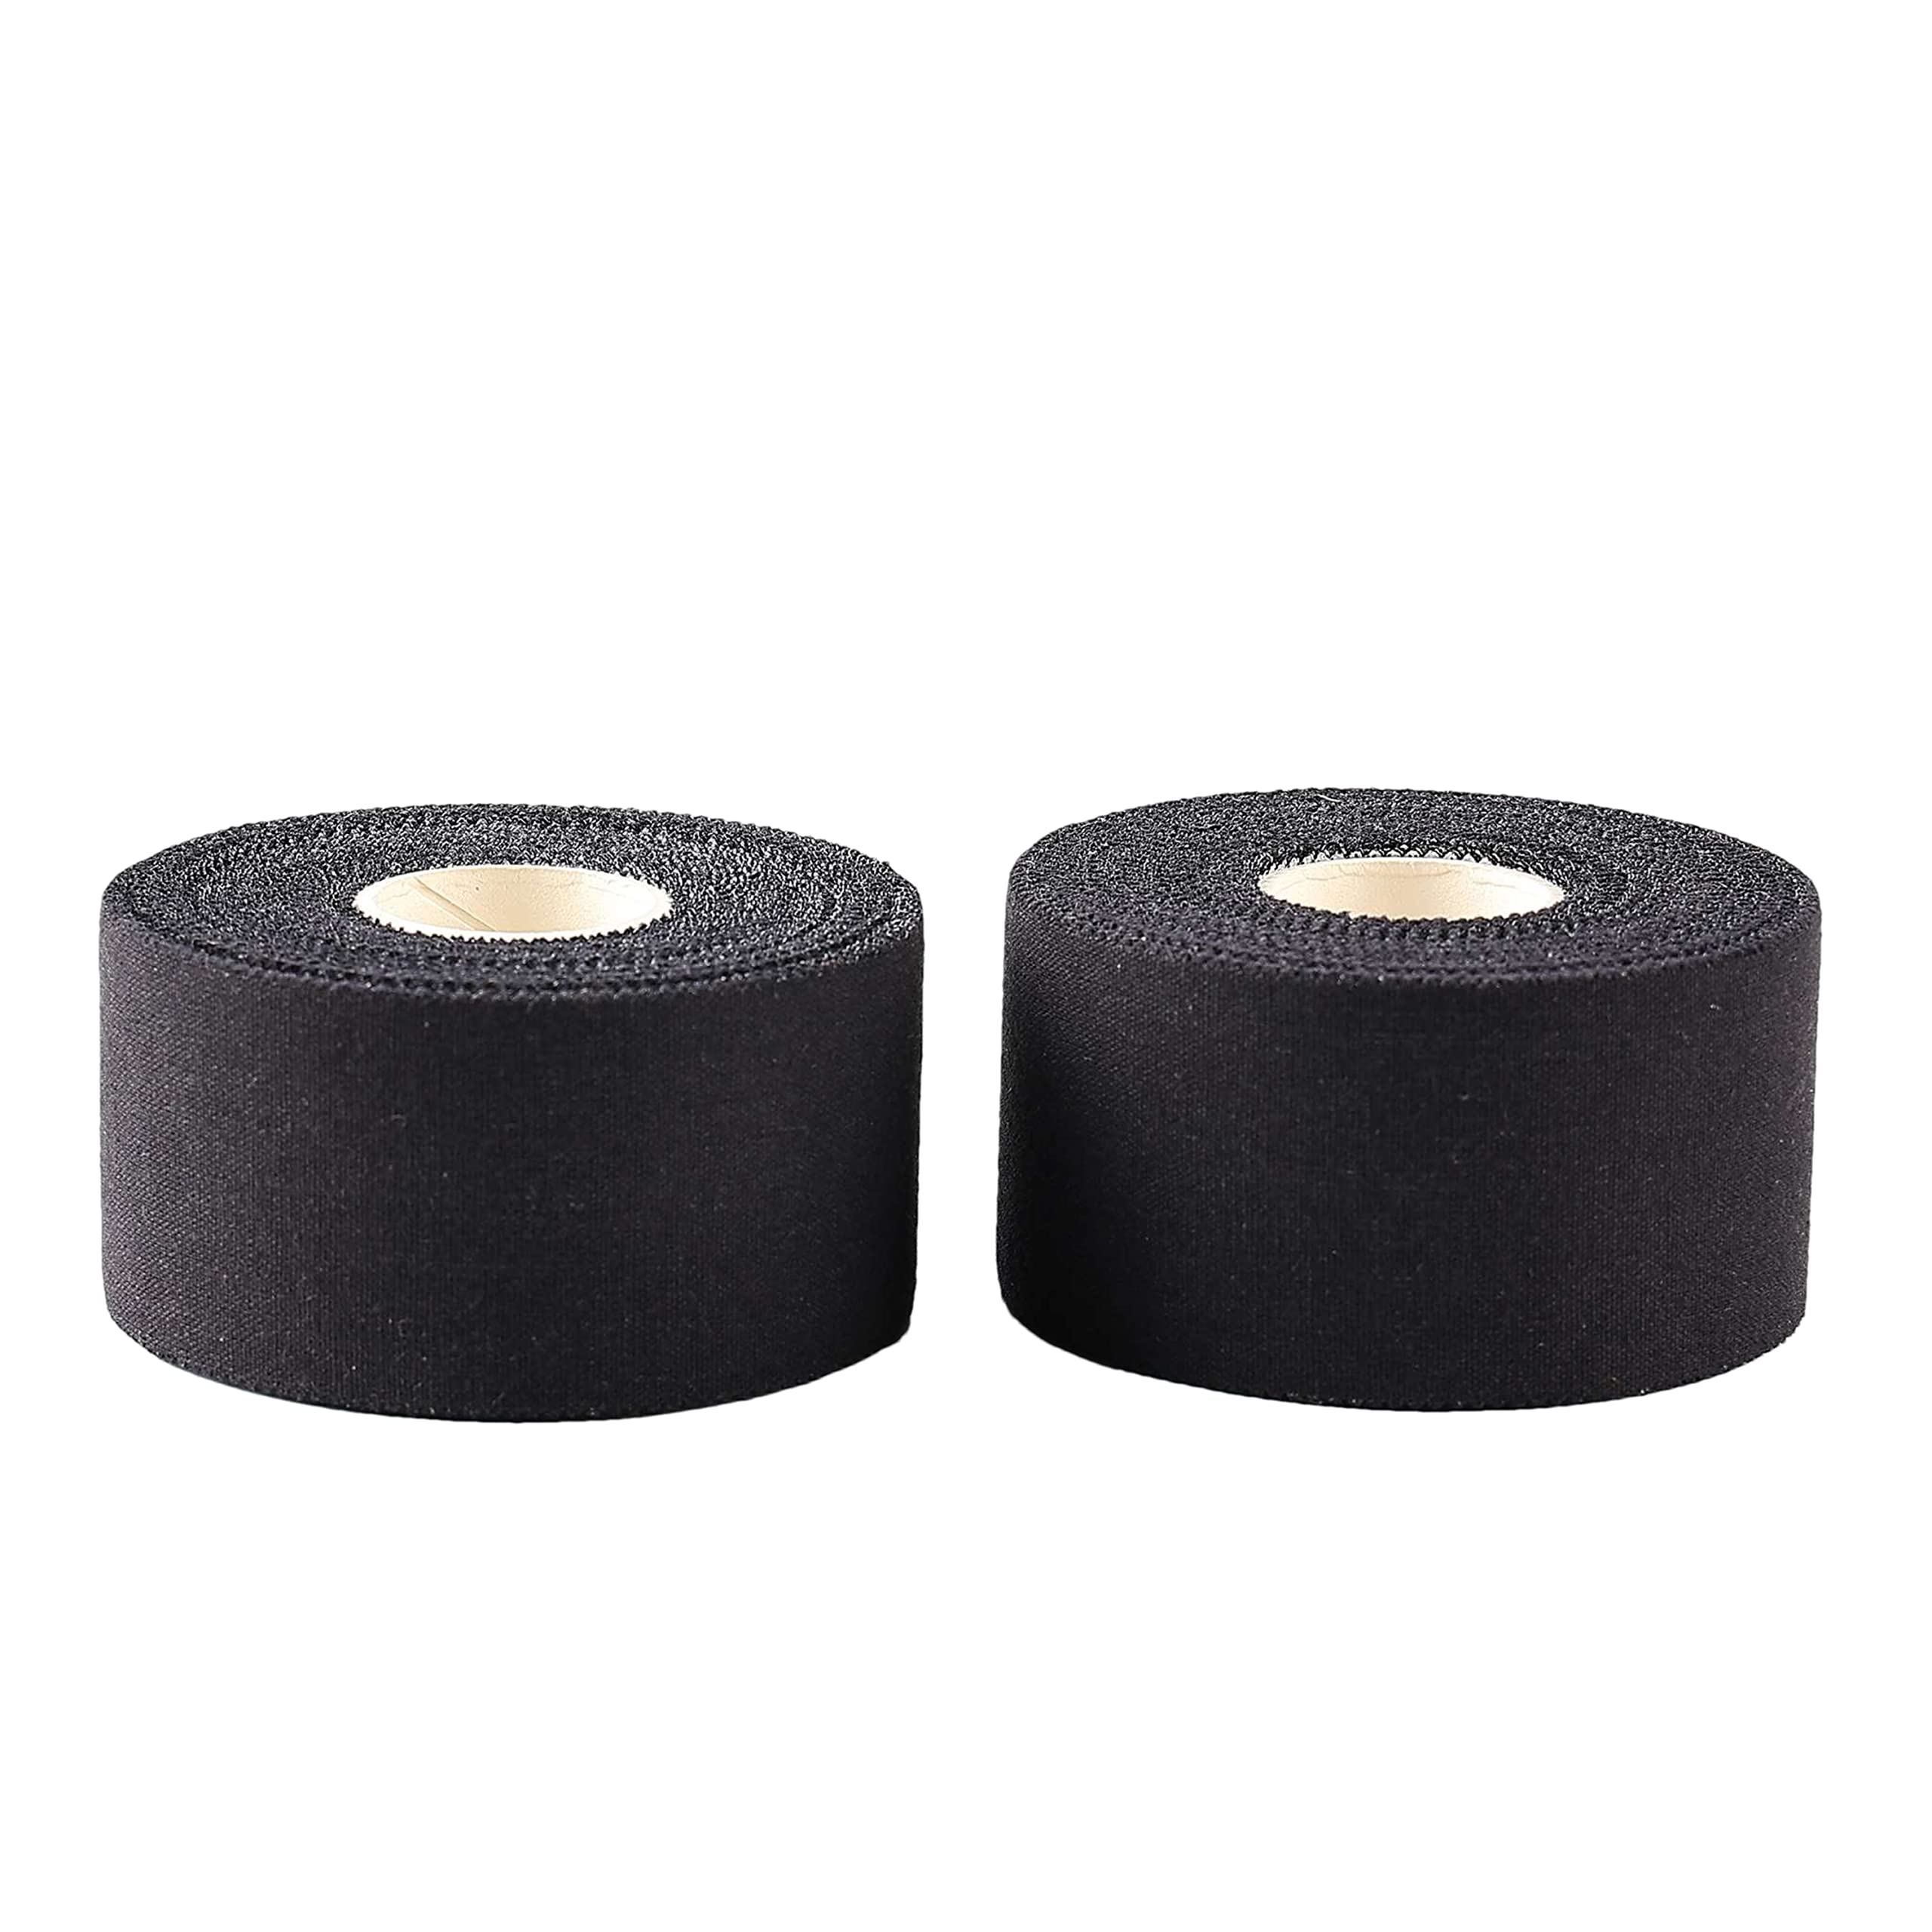 Popbop (2 Pack) Black Athletic Sports Tape, Very Strong Adhesive and Hypoallergenic Breathable Cotton Sports Tape for Bats, Tennis and Boxing